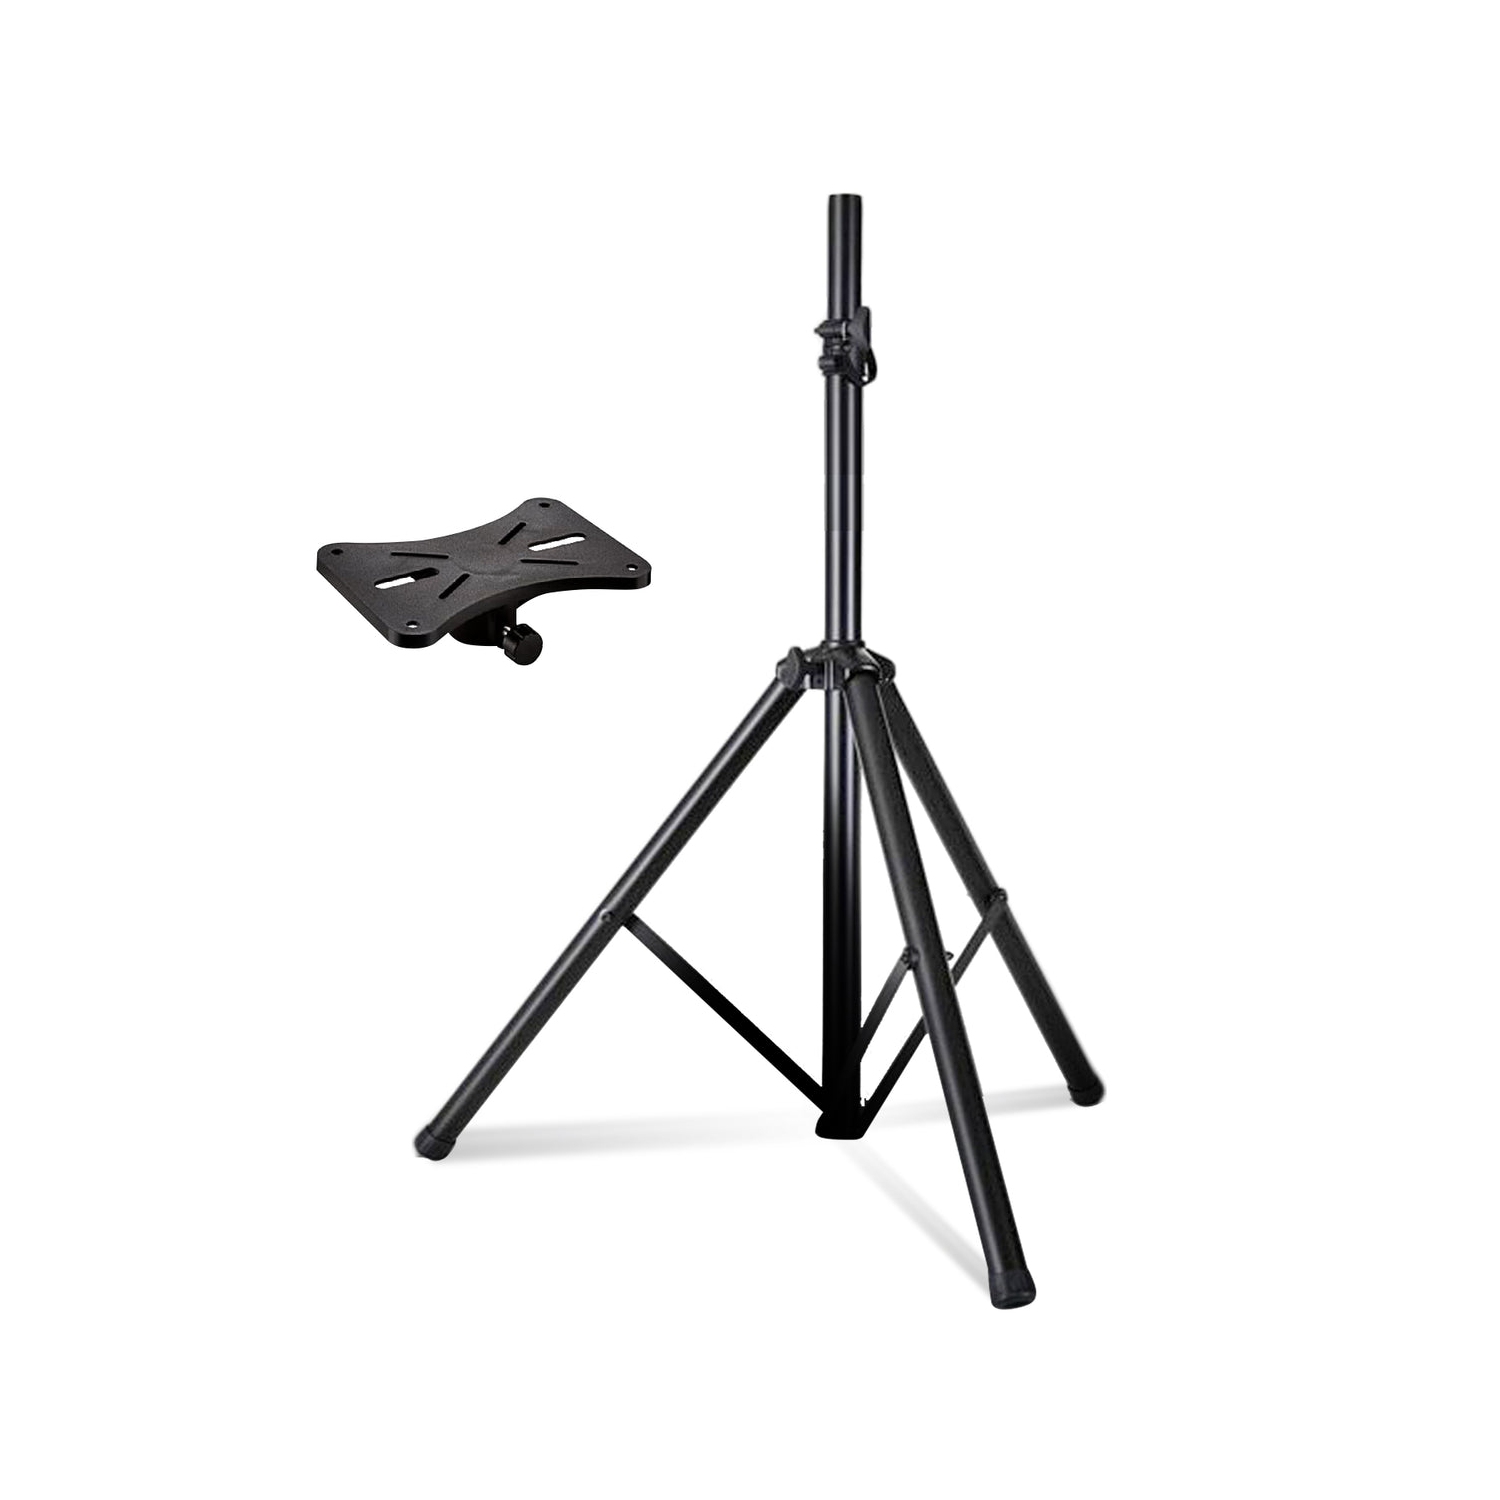 5 Core Speakers Stands 1 Piece Black Height Adjustable Tripod PA Monitor Holder for Large Speakers DJ Stand Para Bocinas - SS ECO 1PK BLK WoB